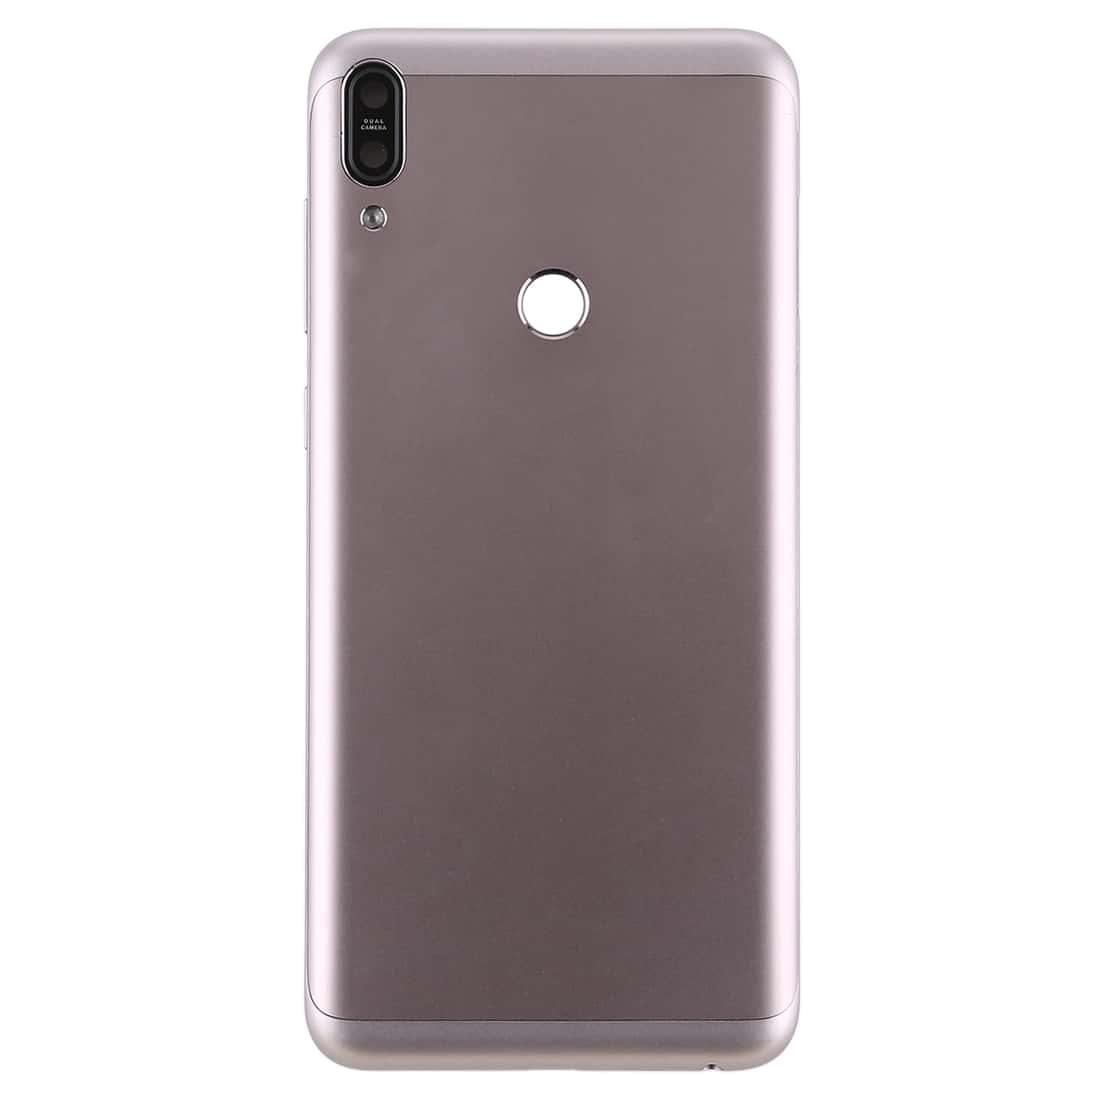 Back Panel Housing Body for Asus Zenfone Max Pro M1 Grey with Camera Lens